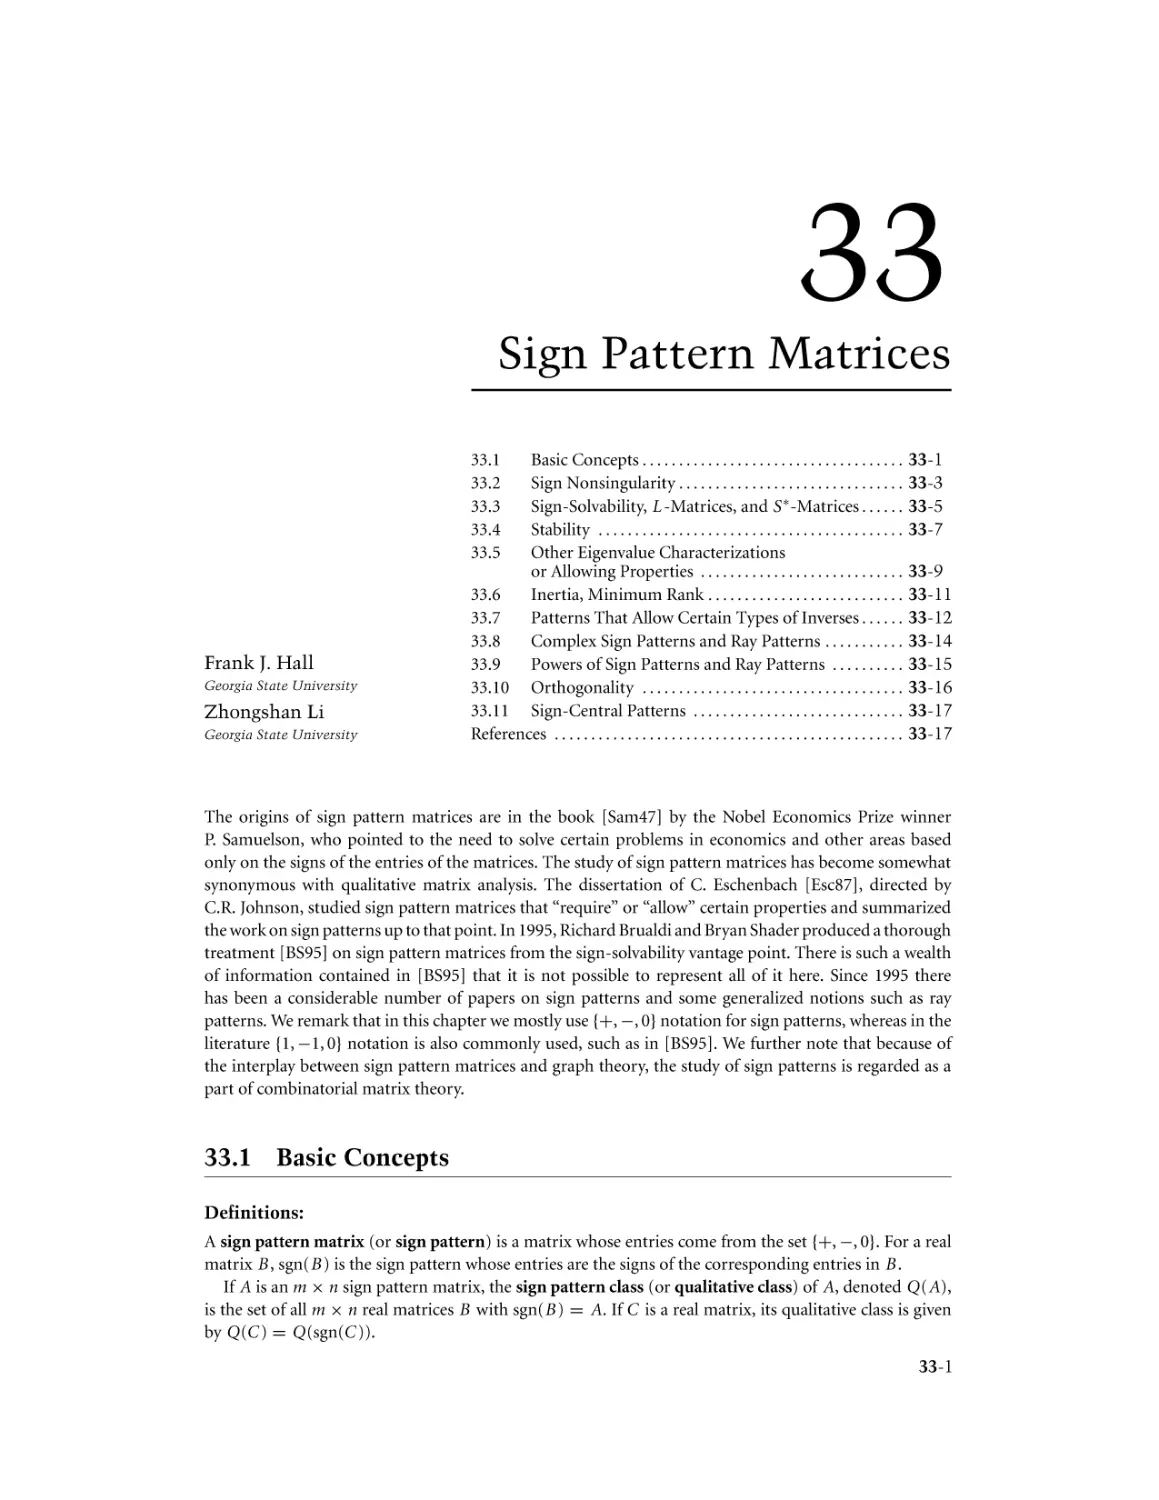 Chapter 33. Sign Pattern Matrices